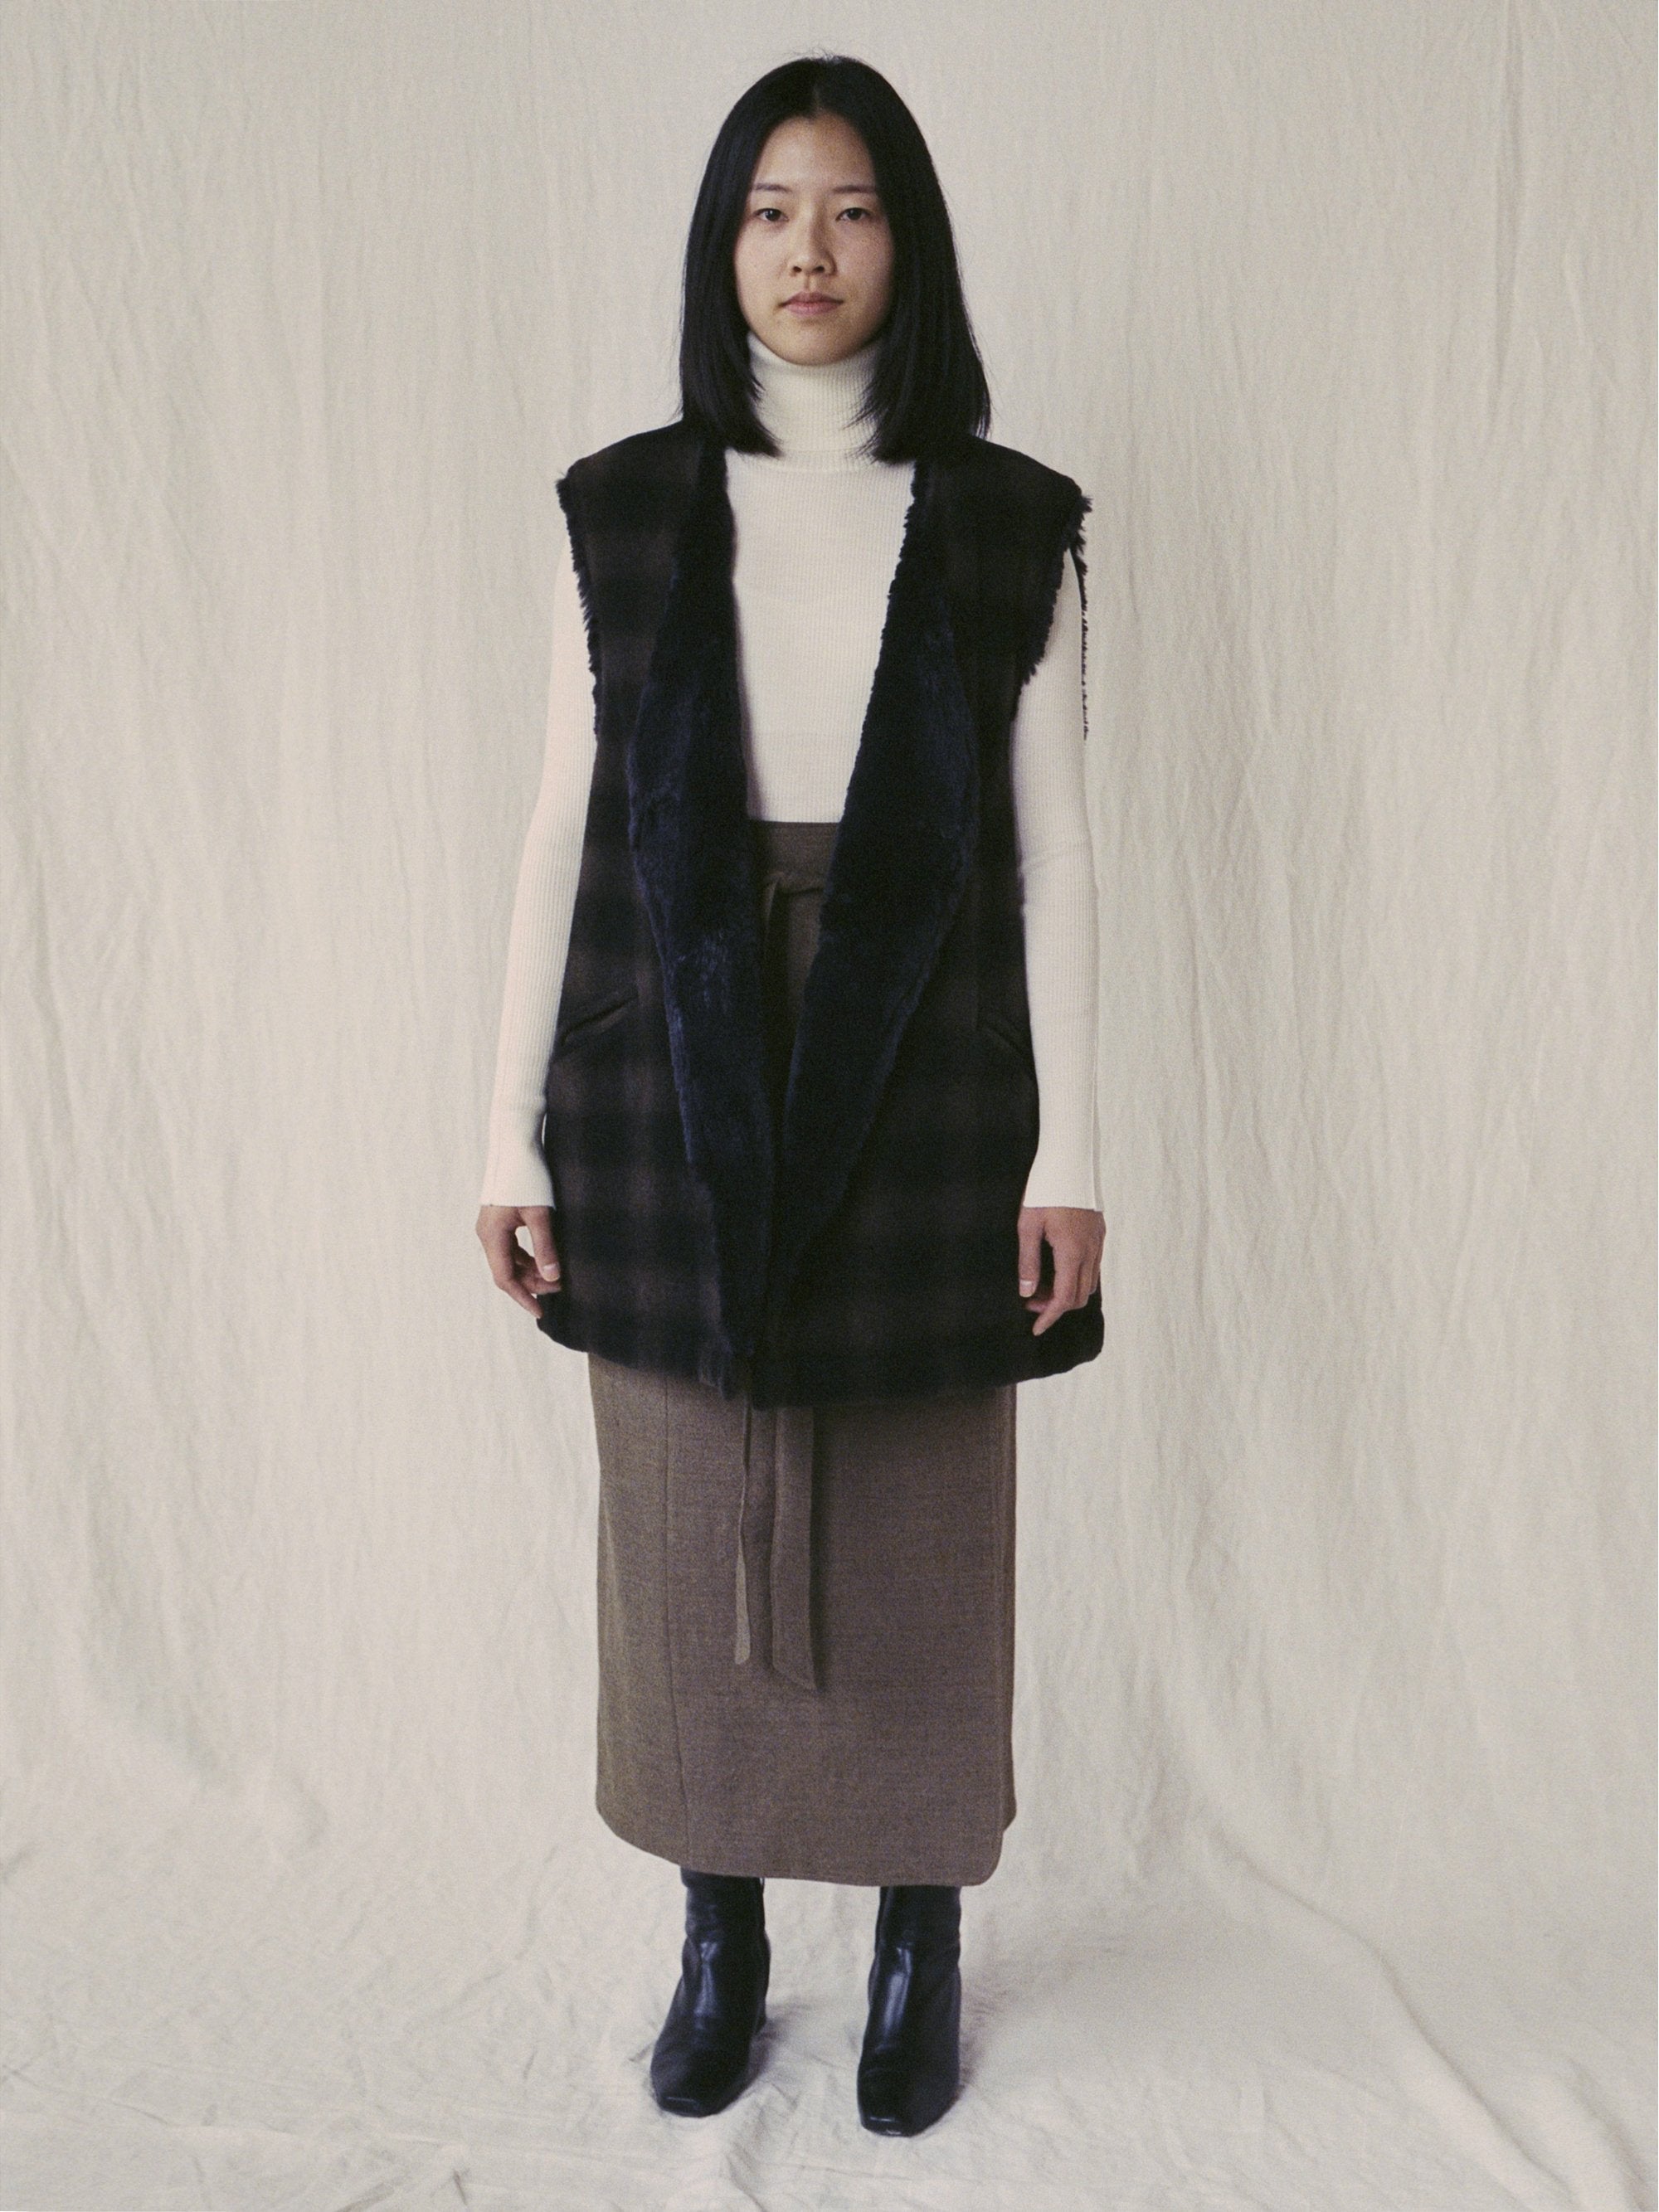 Namu Shop - ts(s) Boa Lined Belted Vest - Ombre Plaid Wool